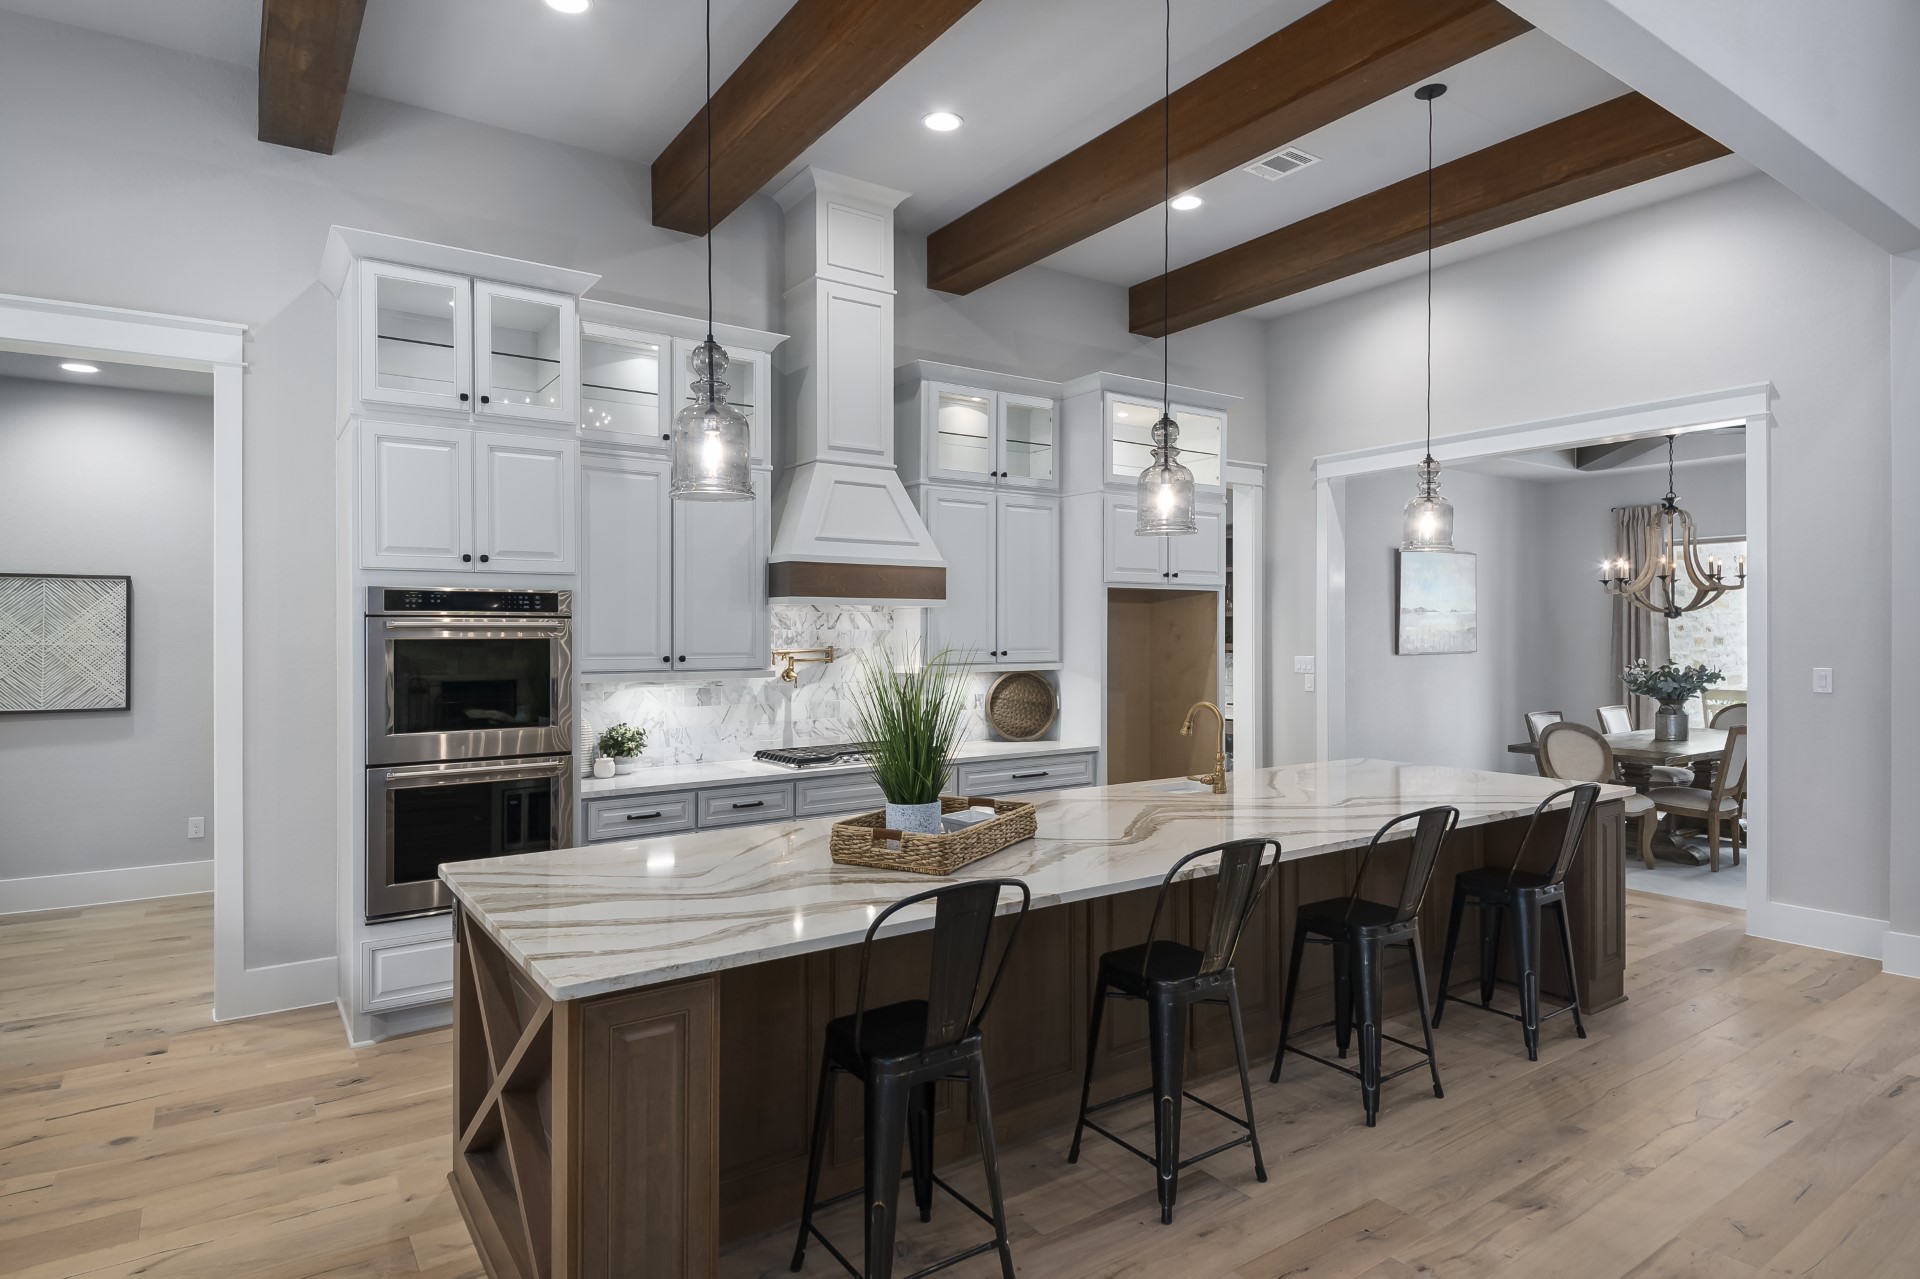 A side view of the whole kitchen area within the Belle Oaks custom floor plan from JLP Builders